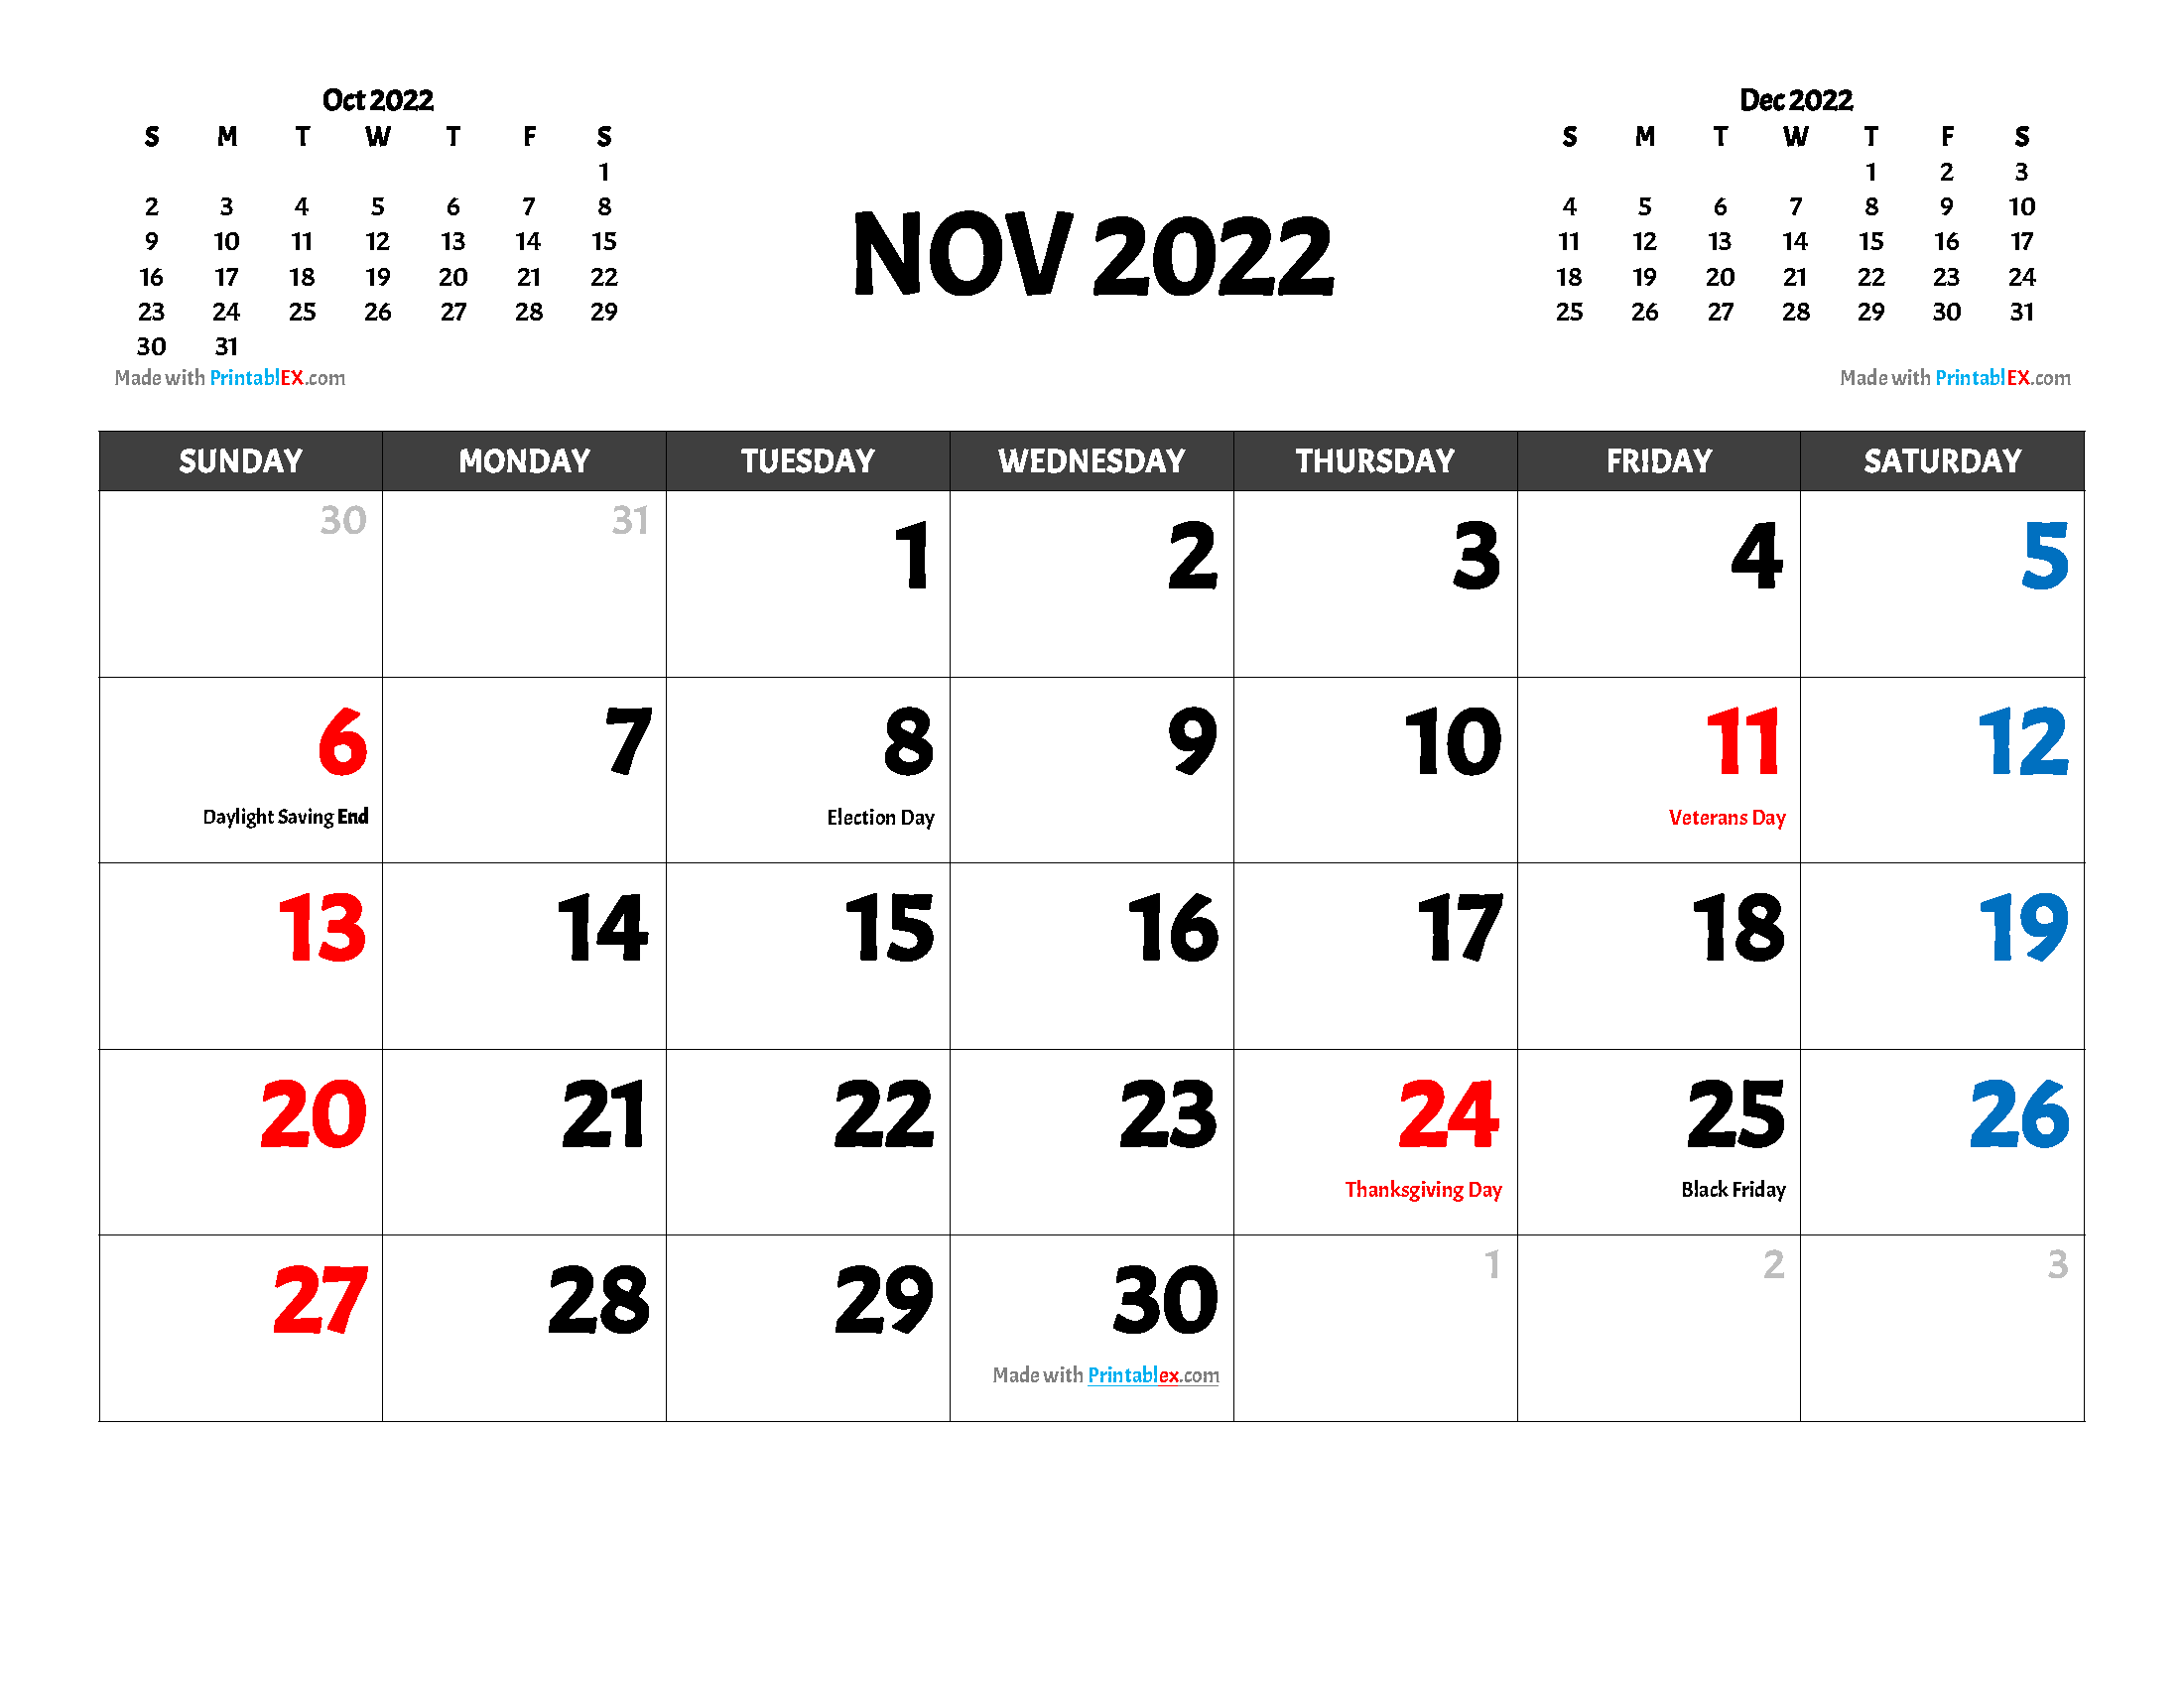 Free Printable November 2022 Calendar with holidays and observances in United States